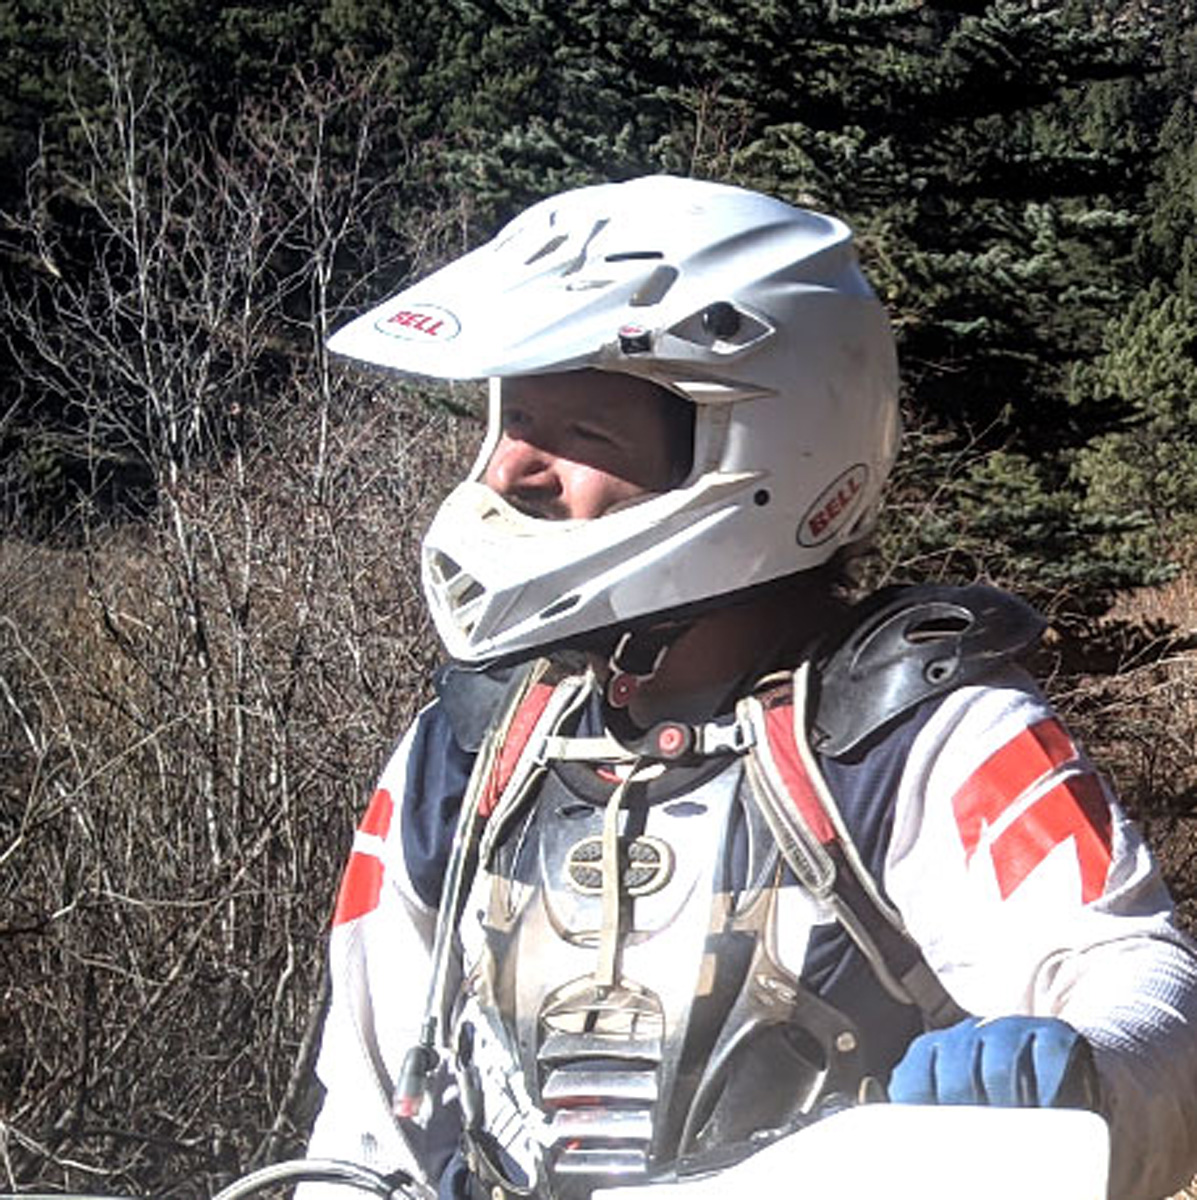 Picture of Andy Lee in dirtbike gear.